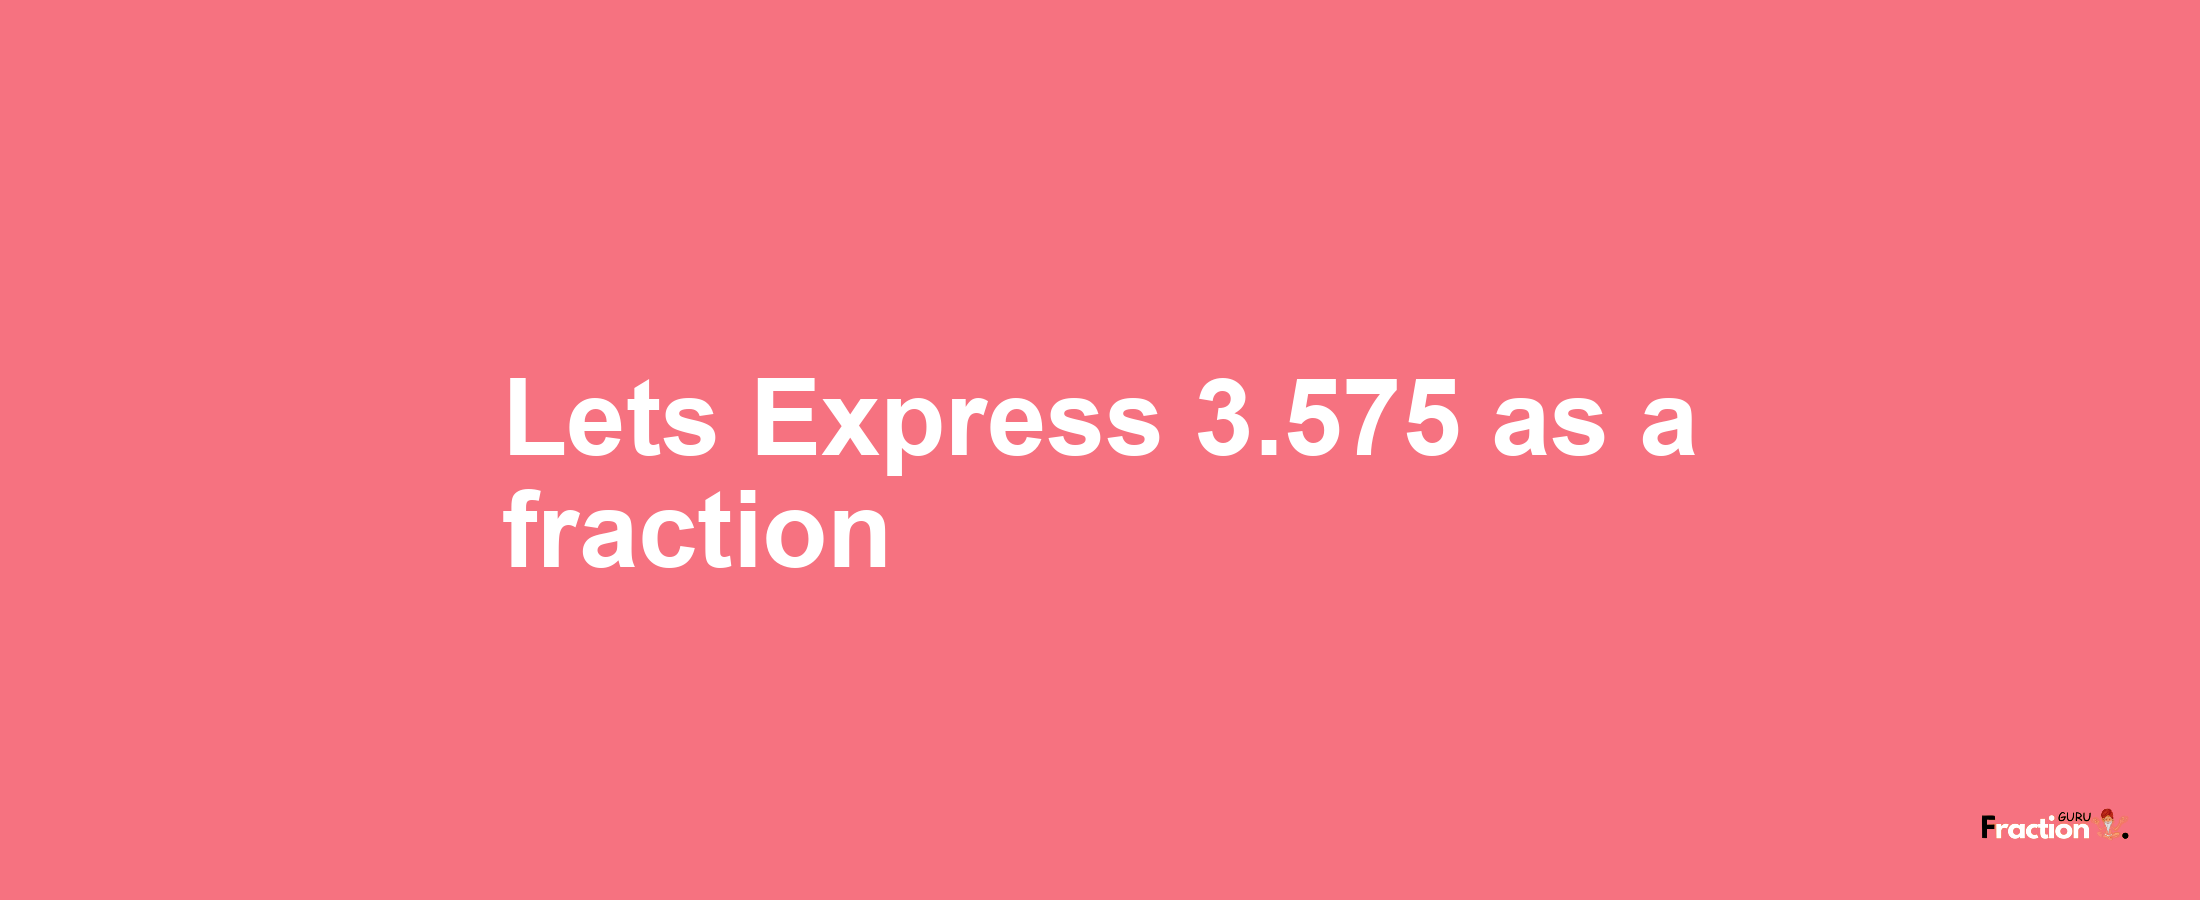 Lets Express 3.575 as afraction